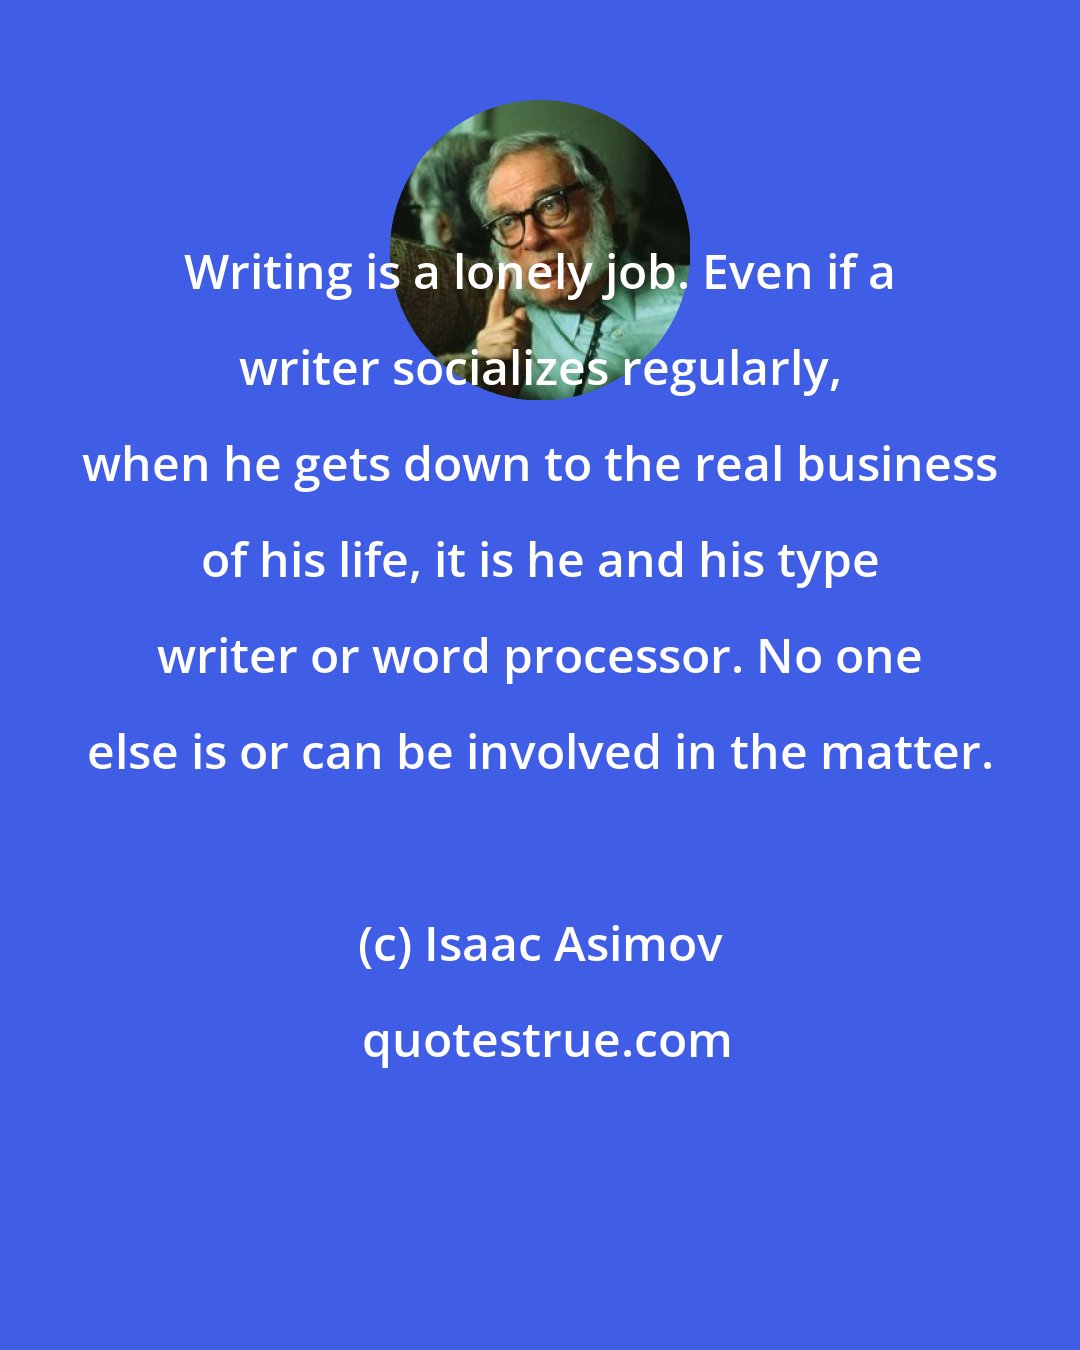 Isaac Asimov: Writing is a lonely job. Even if a writer socializes regularly, when he gets down to the real business of his life, it is he and his type writer or word processor. No one else is or can be involved in the matter.